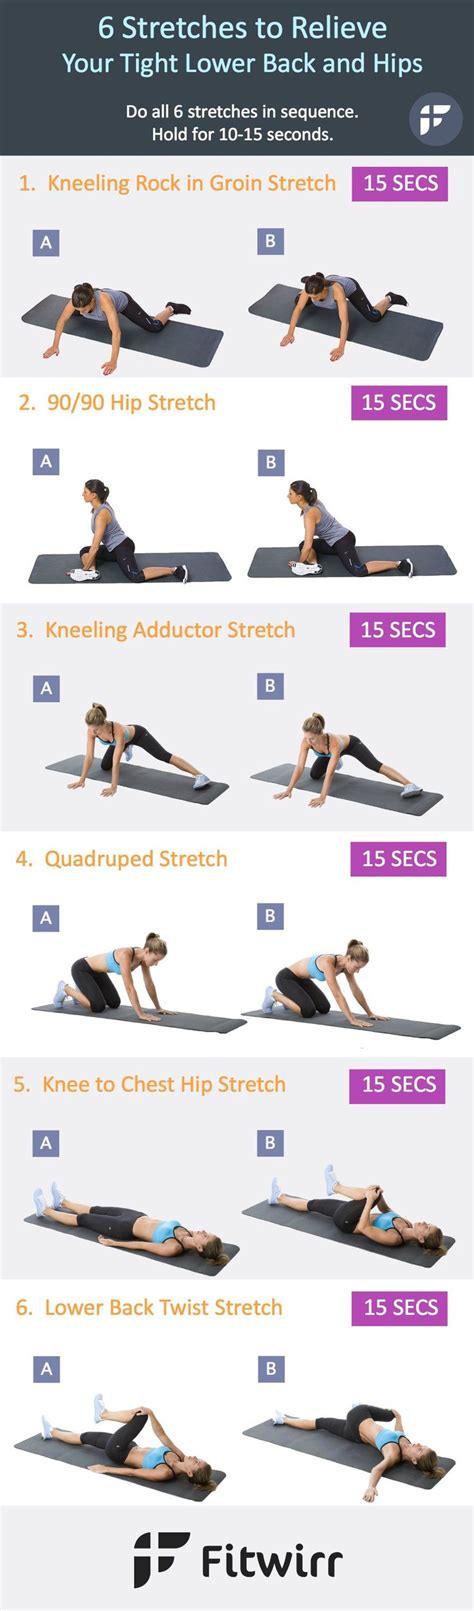 17 Best Images About Fitness Stretching On Pinterest Flexibility